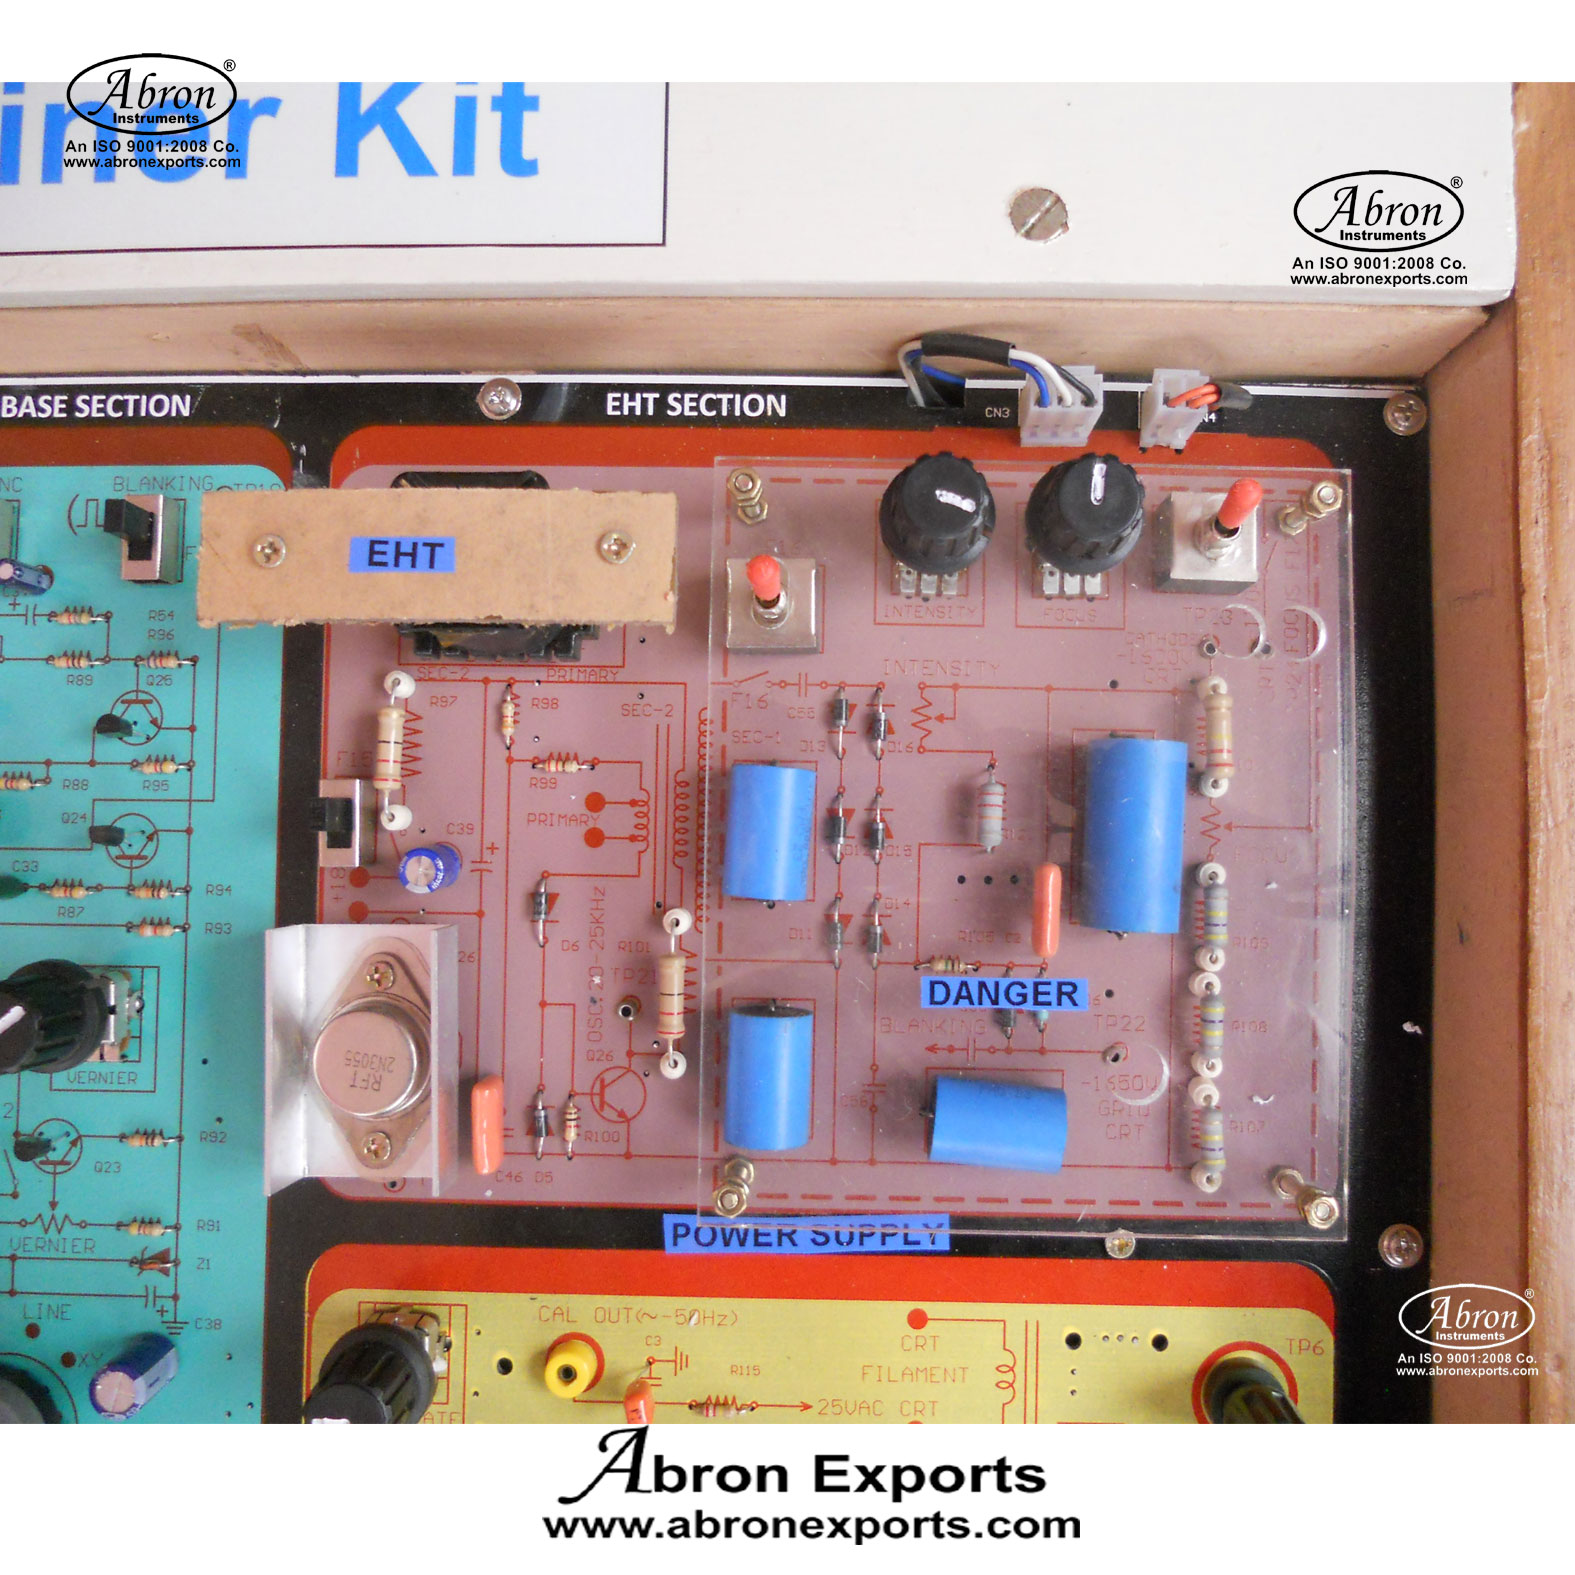 Cro demonstration trainer kit to study abron part AE-1426J